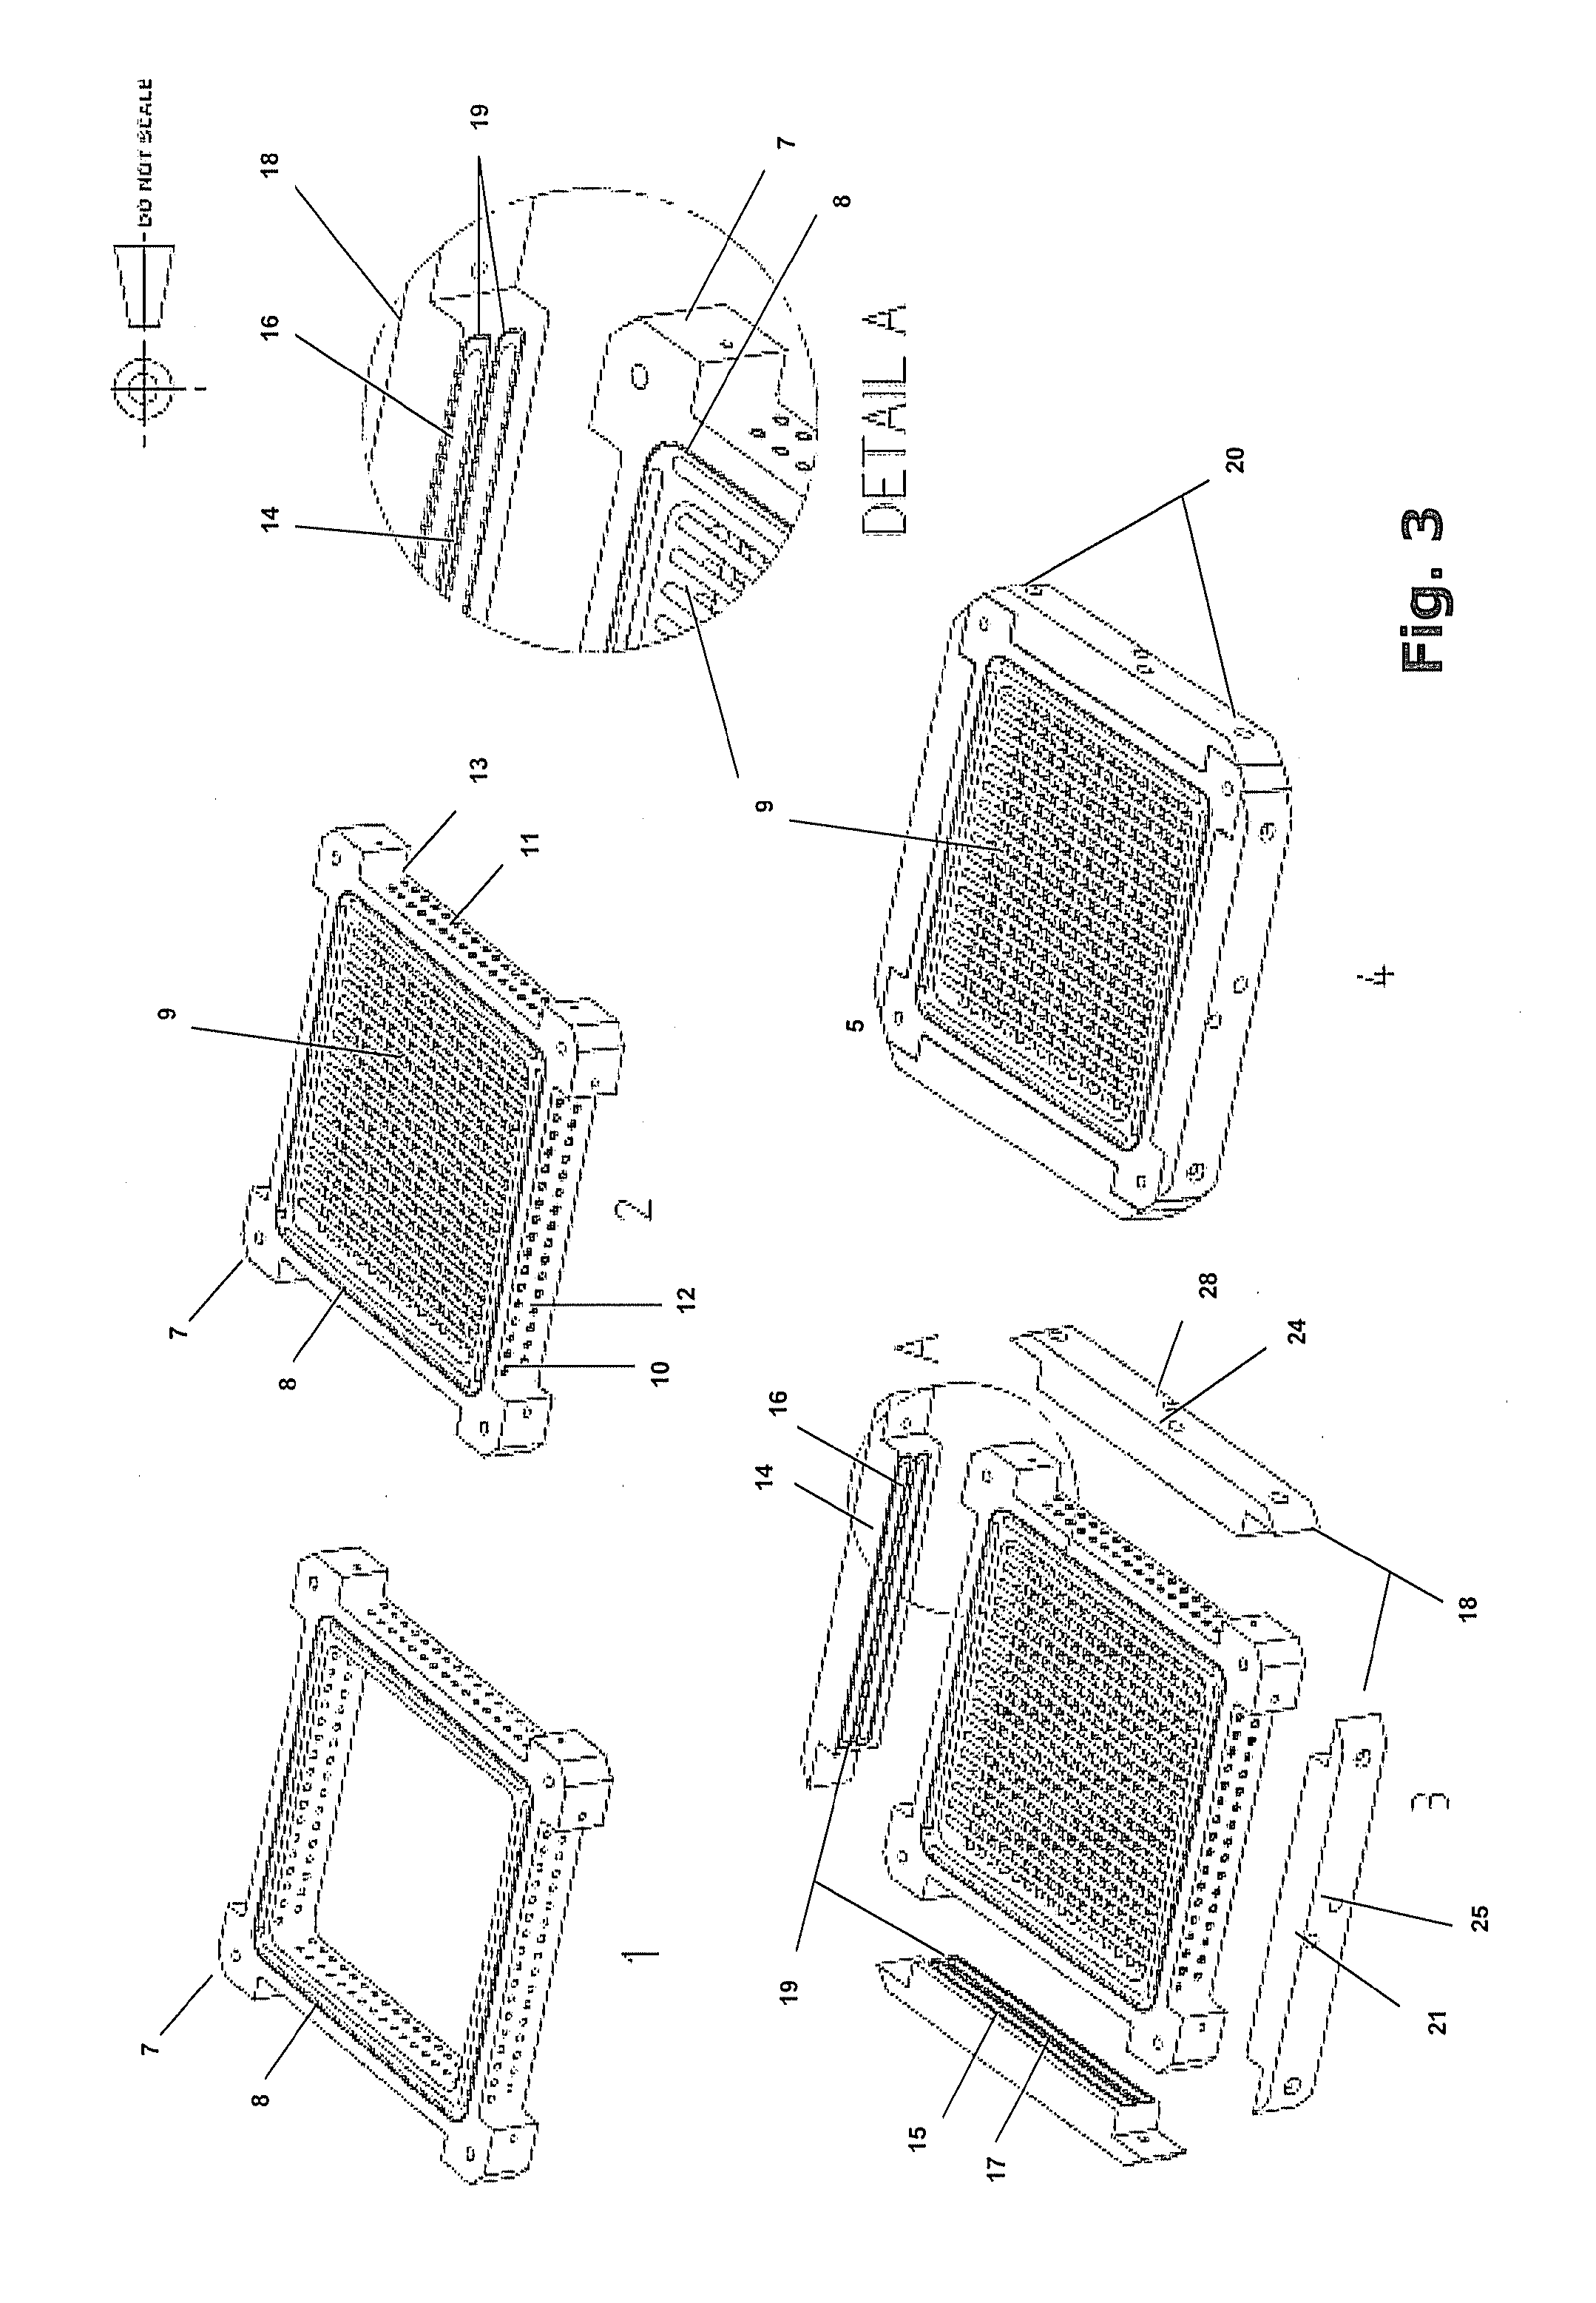 Scalable cell culture bioreactor and cell culture process